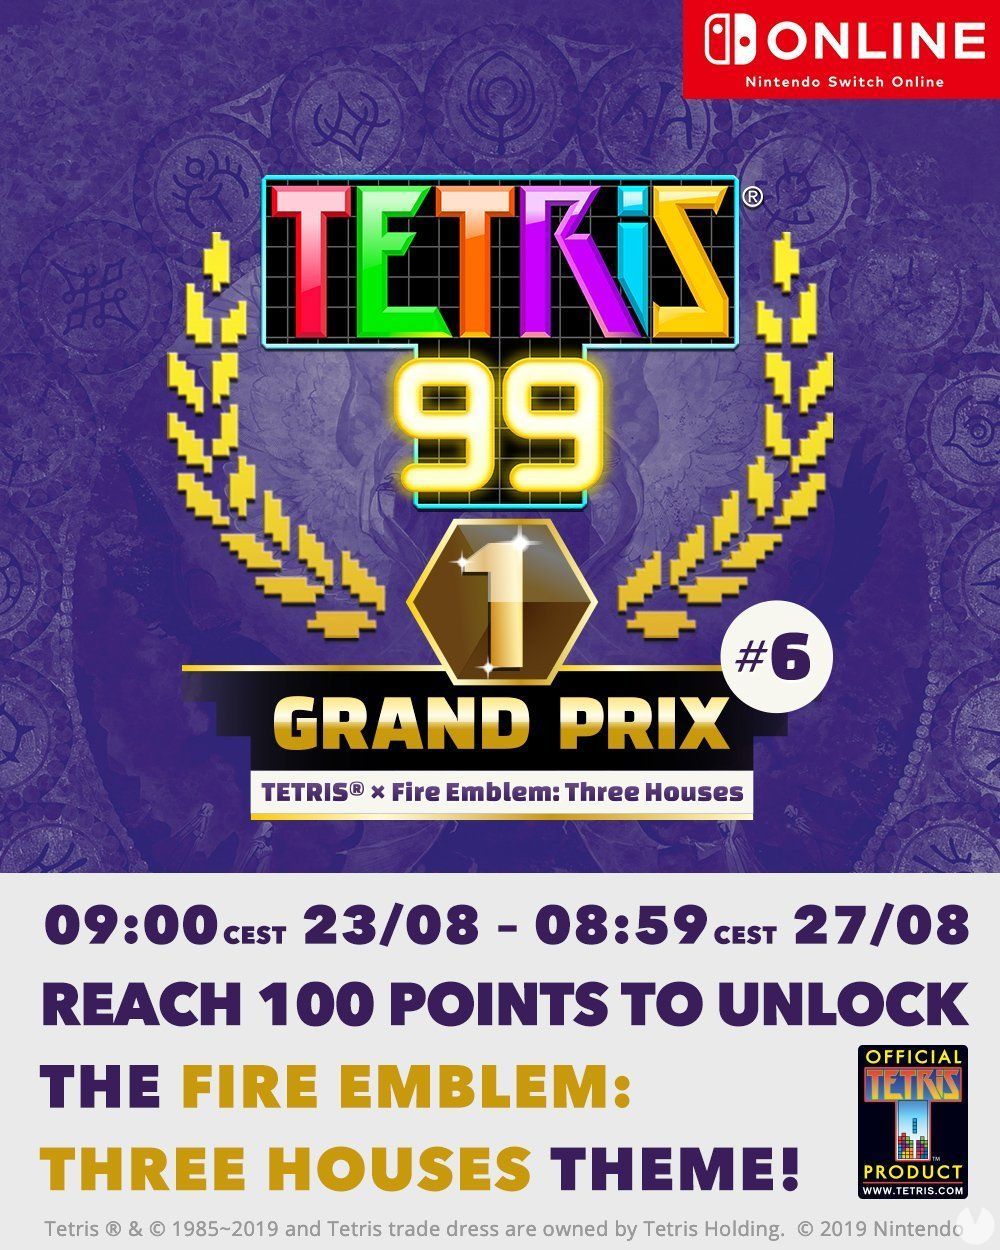 Tetris 99 will have a special event with Fire Emblem: Three Houses as the great protagonist